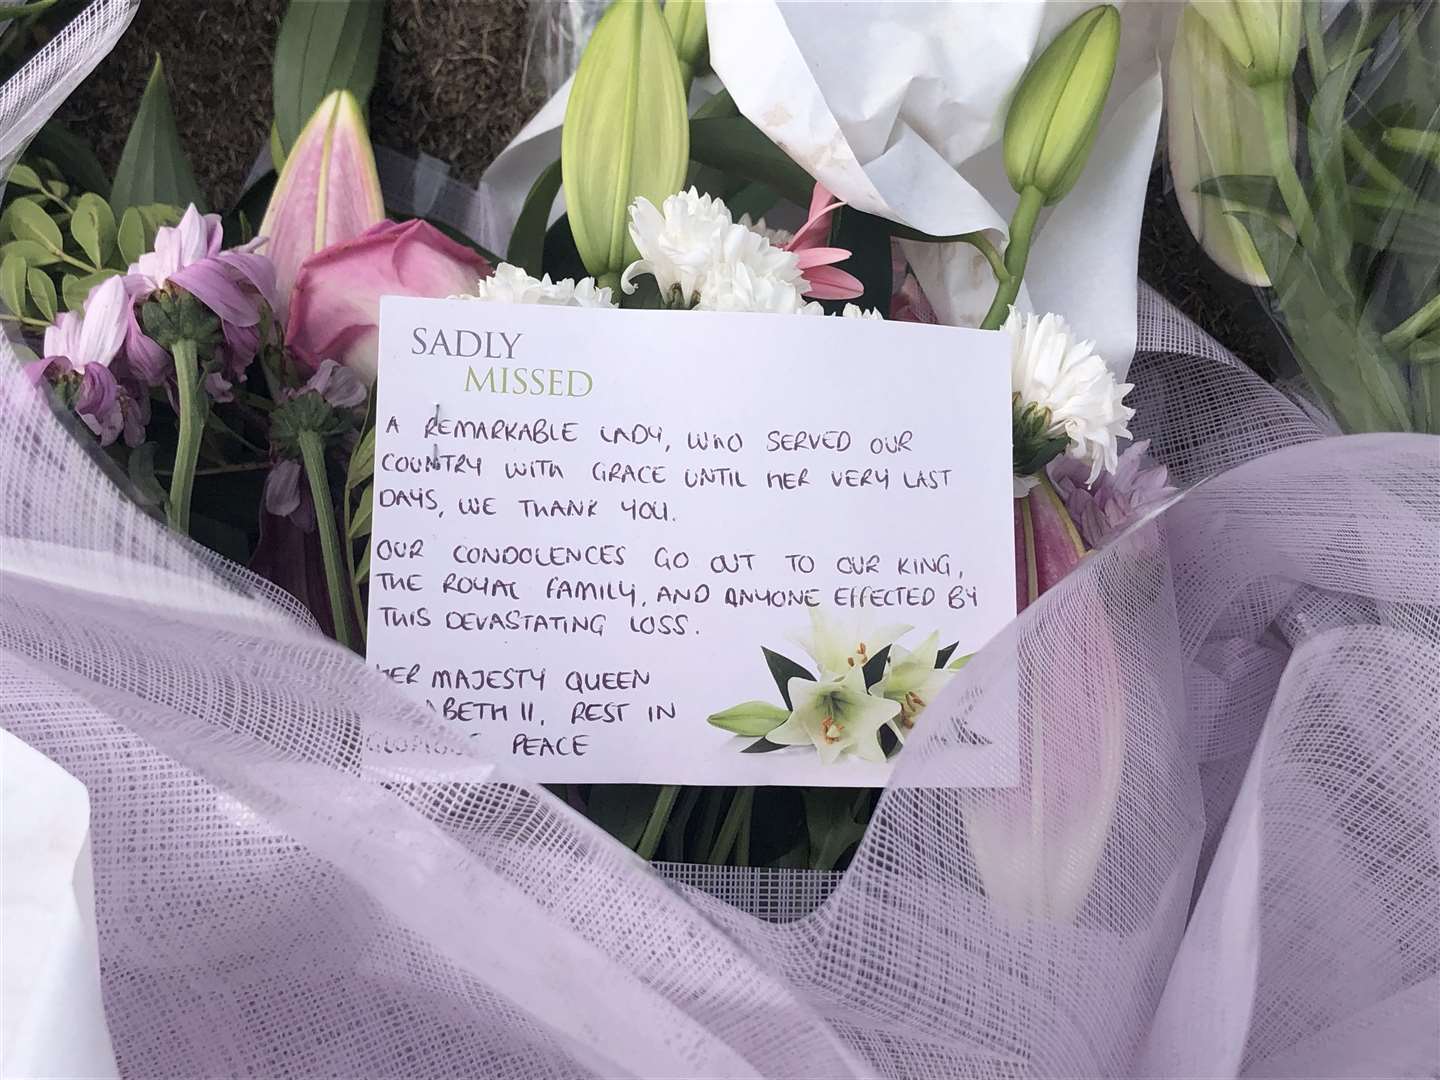 Messages of condolences have been left